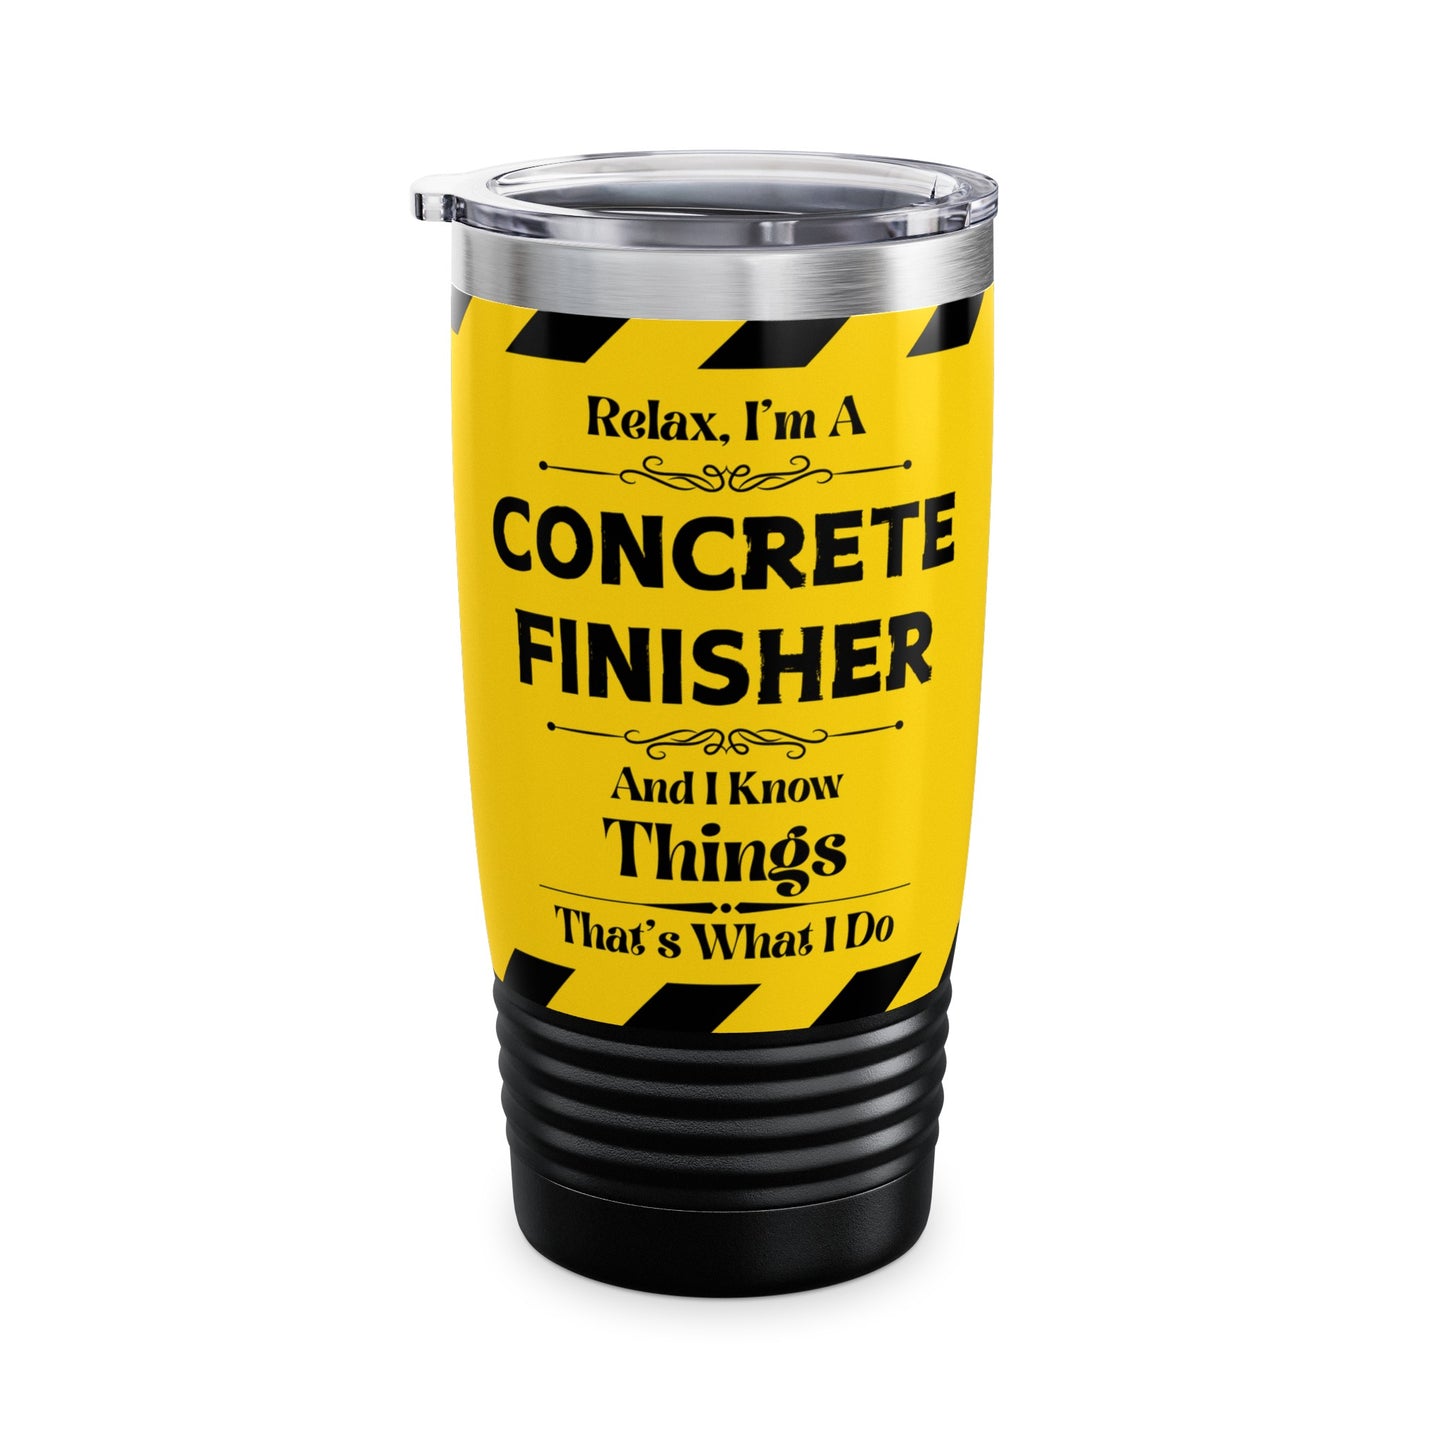 Relax, I'm A CONCRETE FINISHER, And I Know Things - Ringneck Tumbler, 20oz